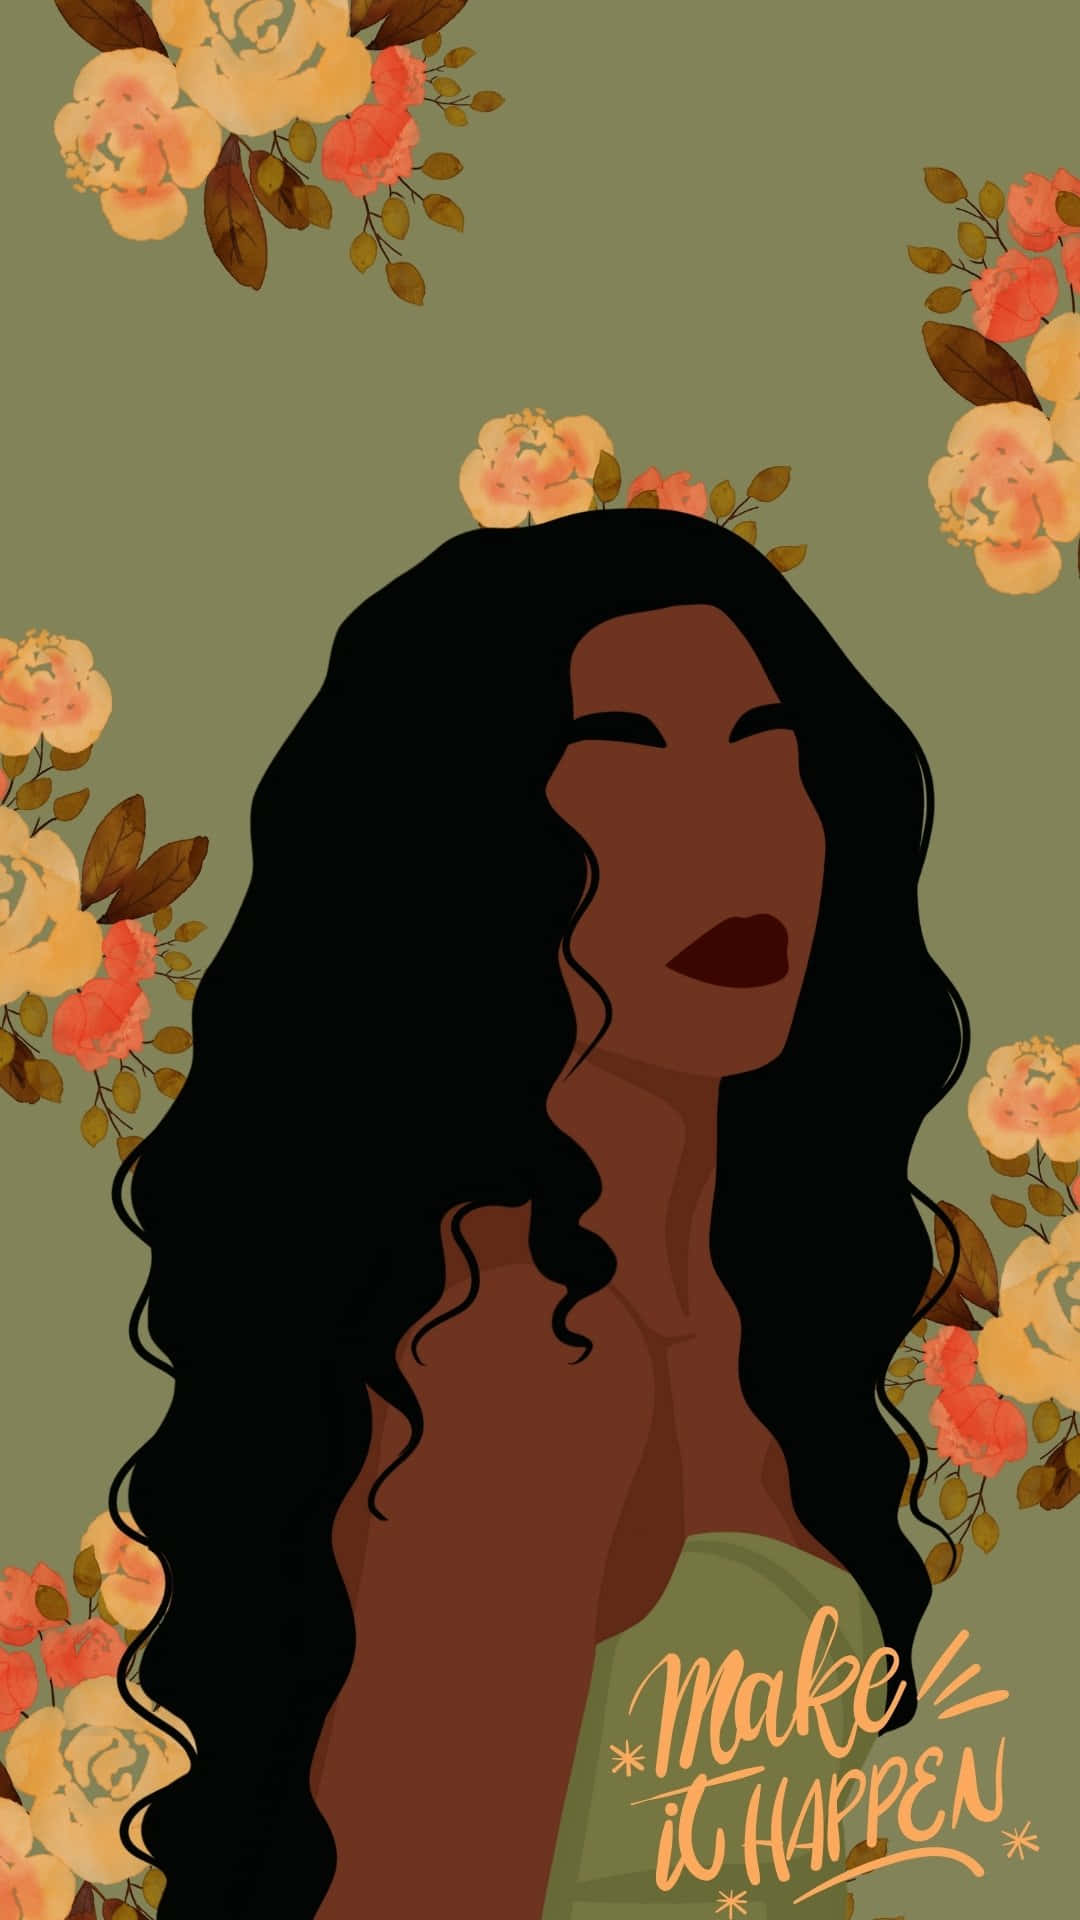 Inspirational Floral Afro Woman Illustration Wallpaper